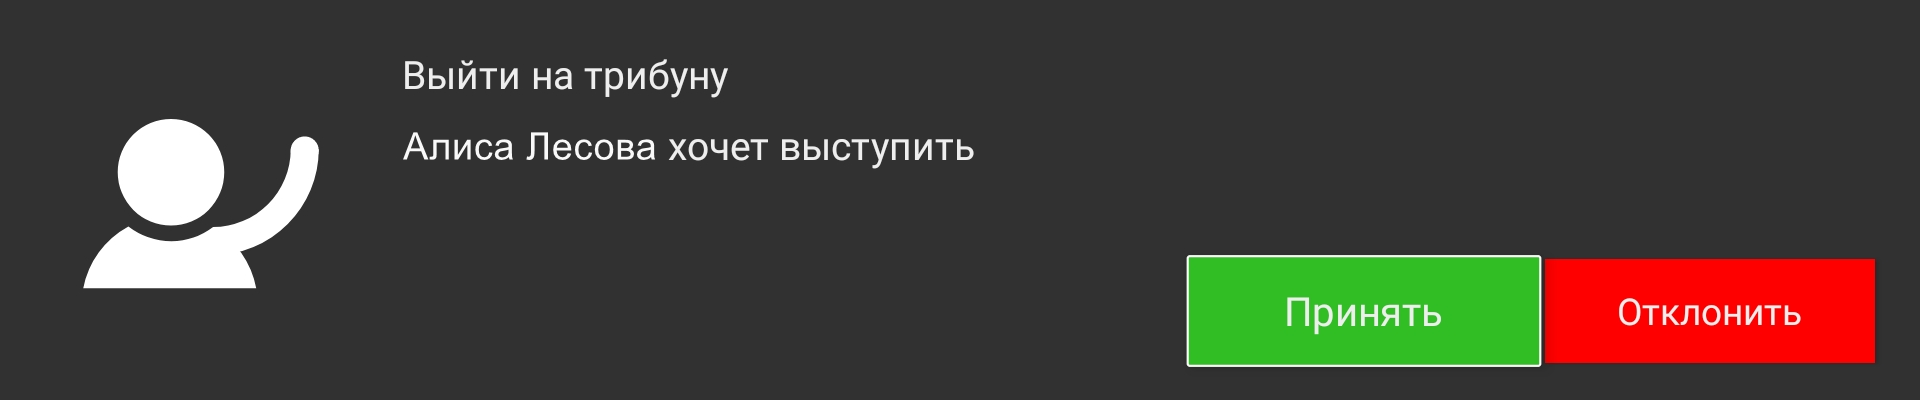 /client-android-tv/media/podium_notification/ru.png